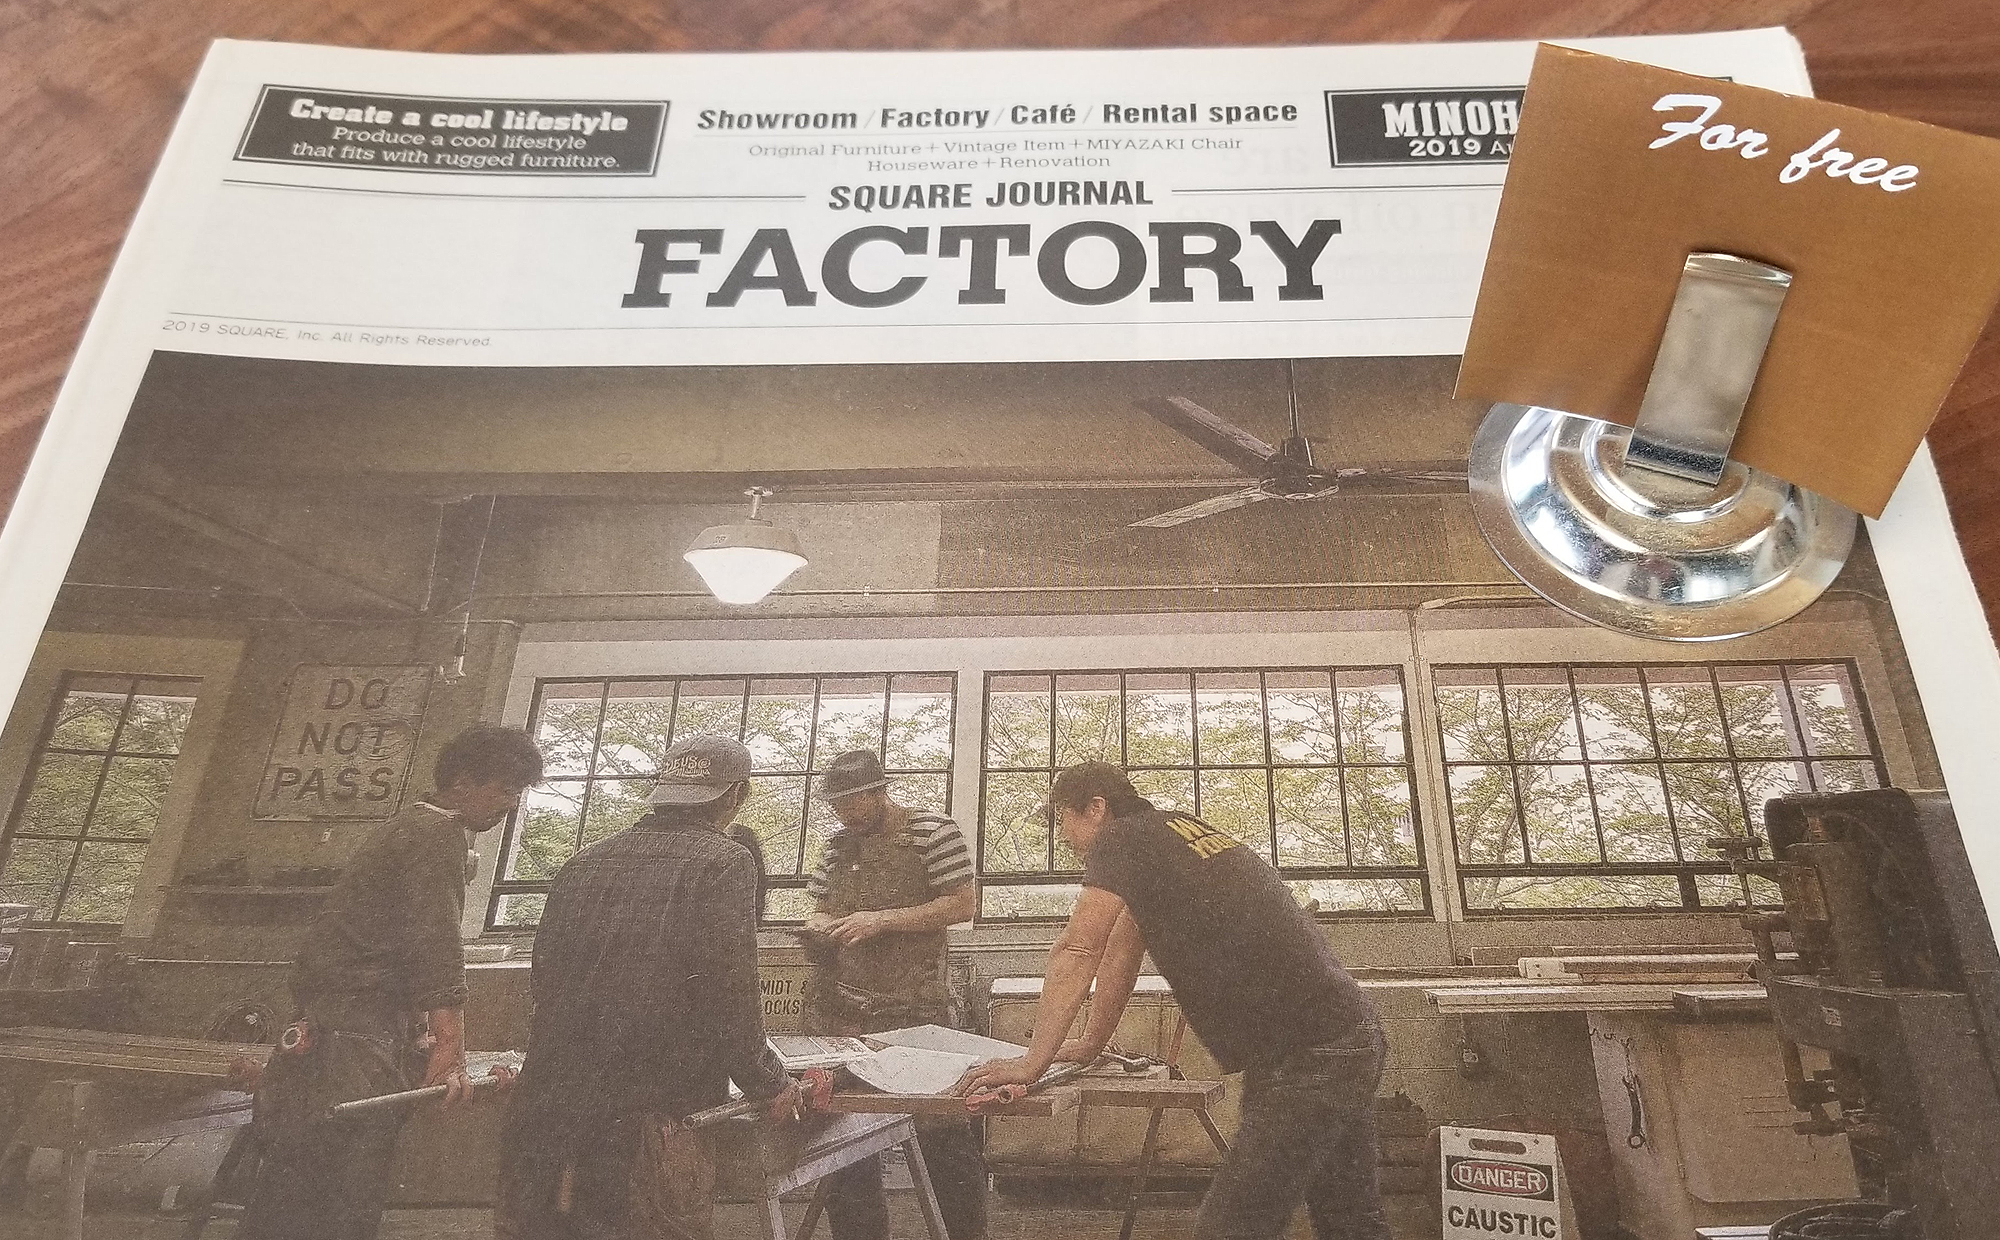 [SQUARE JOURNAL]最新号はFACTORY